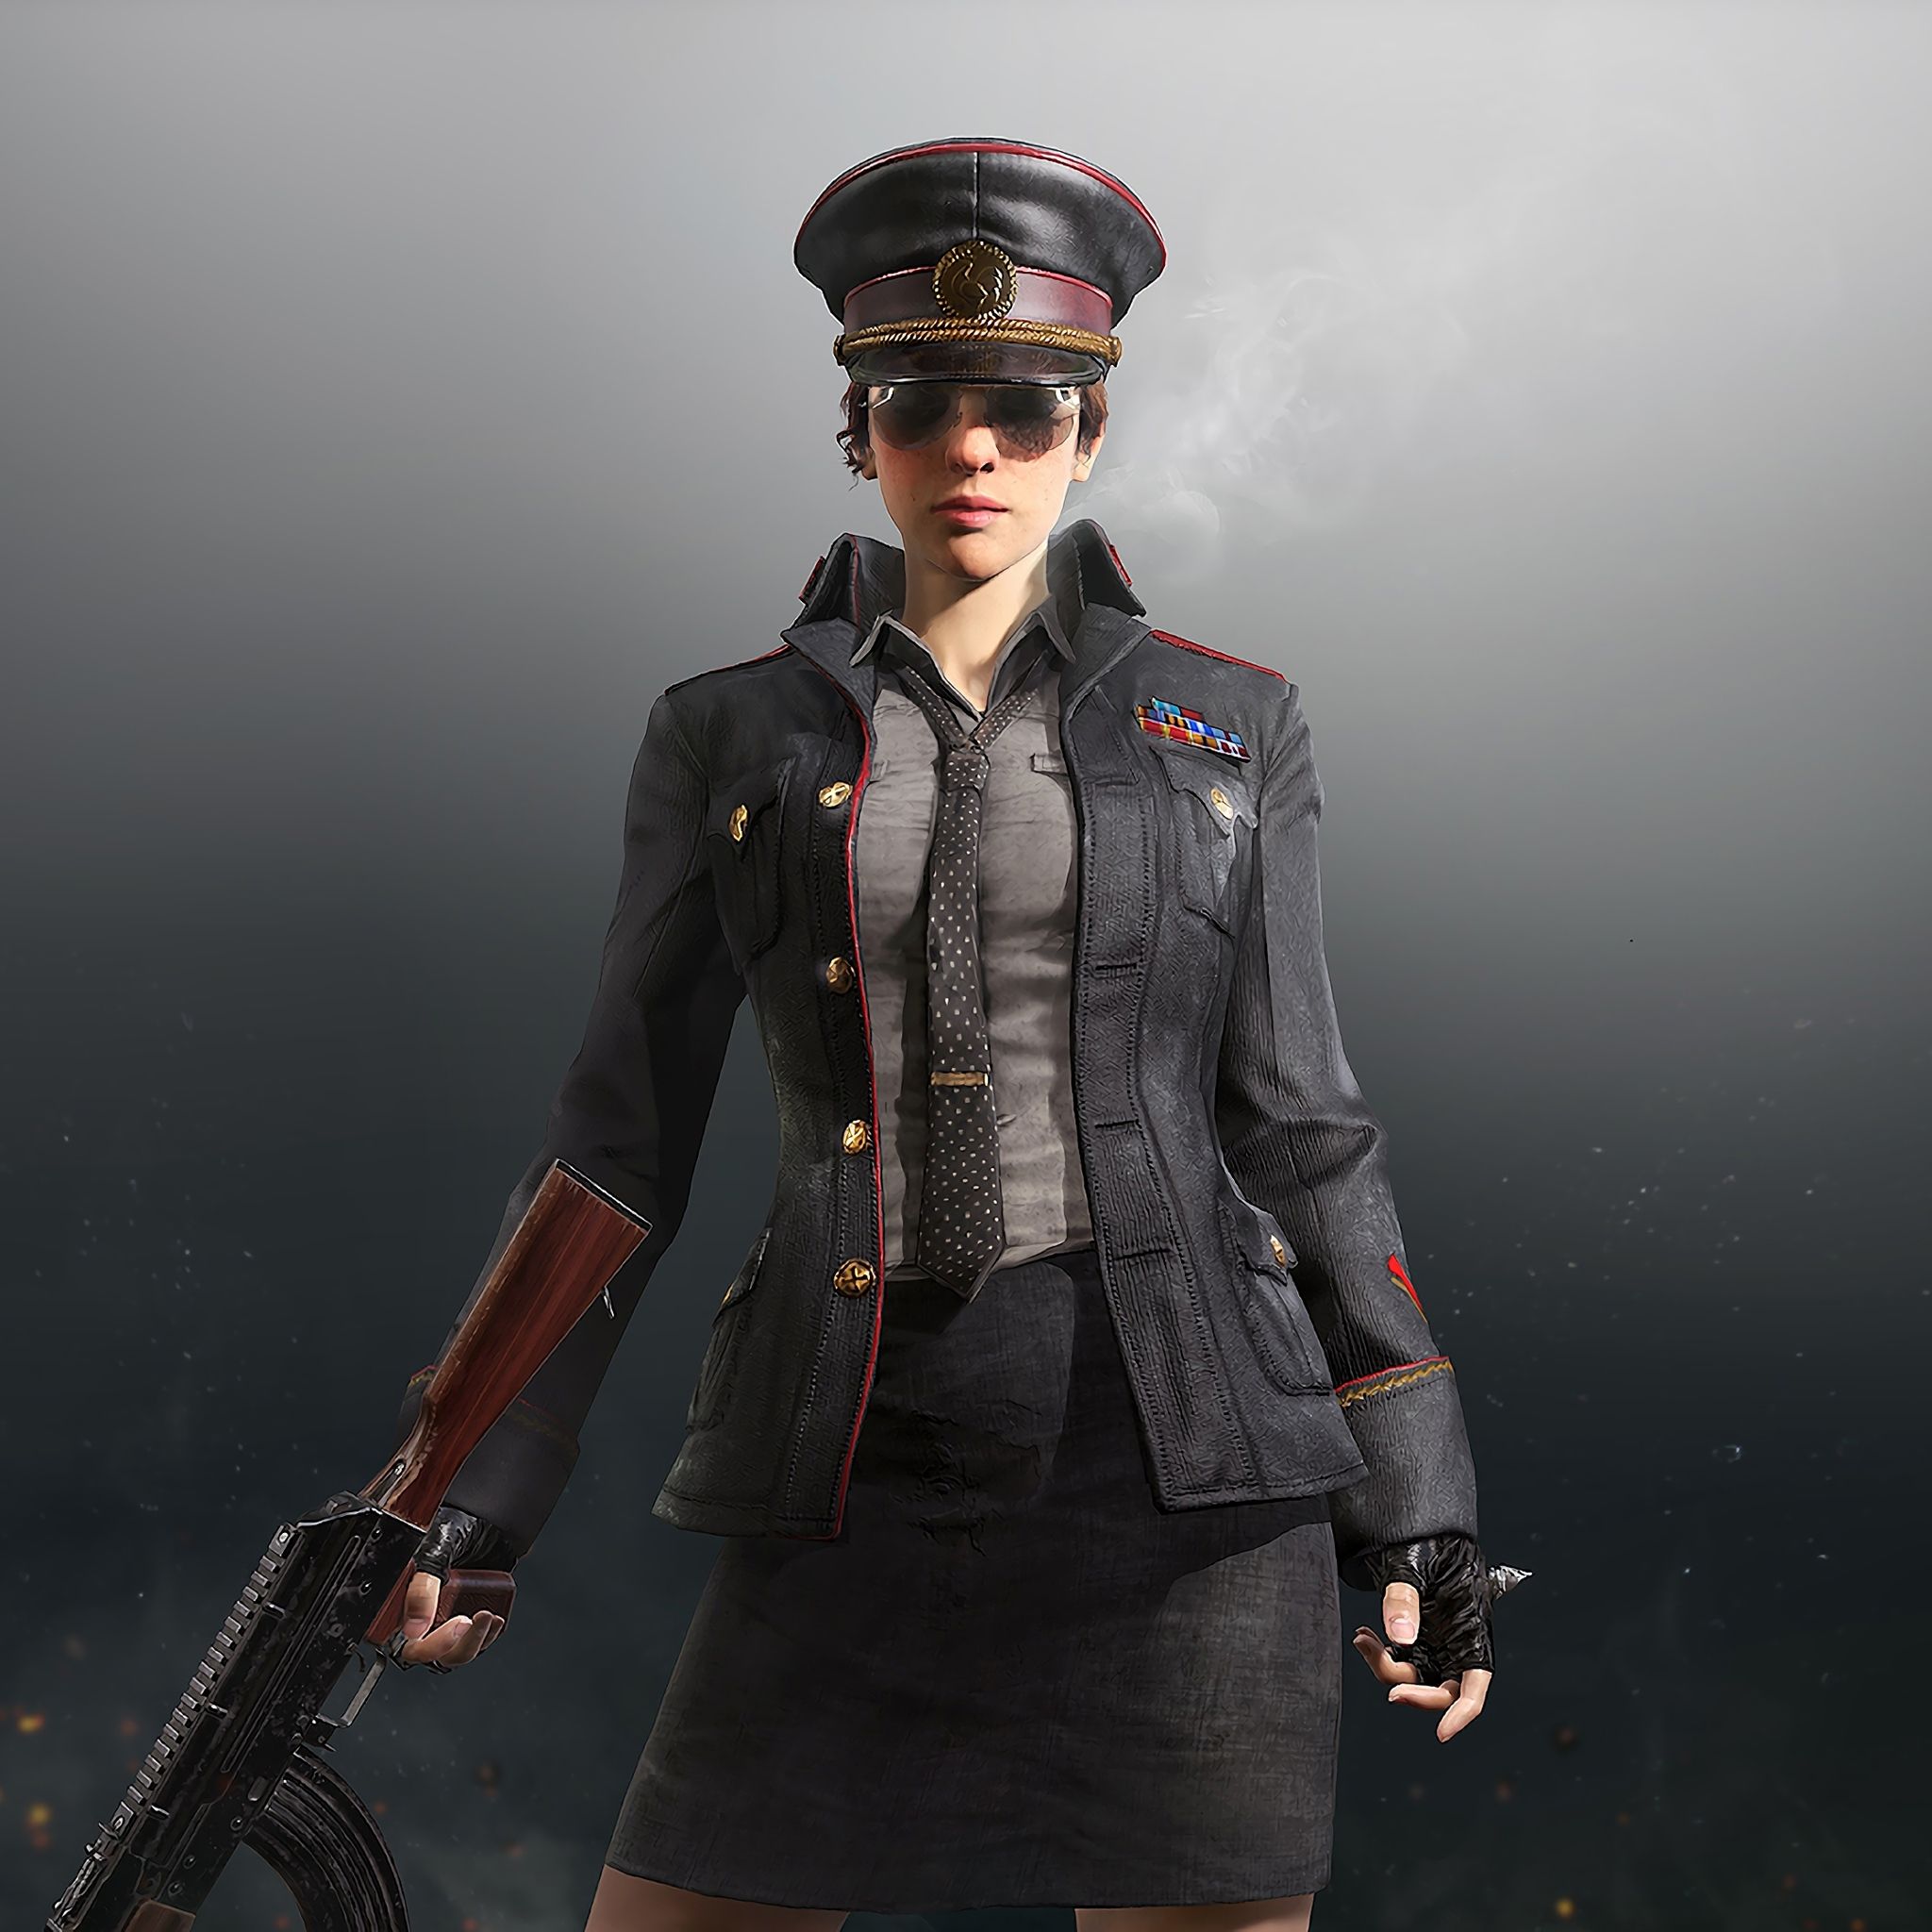 Pubg Police Girl iPad Air HD 4k Wallpaper, Image, Background, Photo and Picture